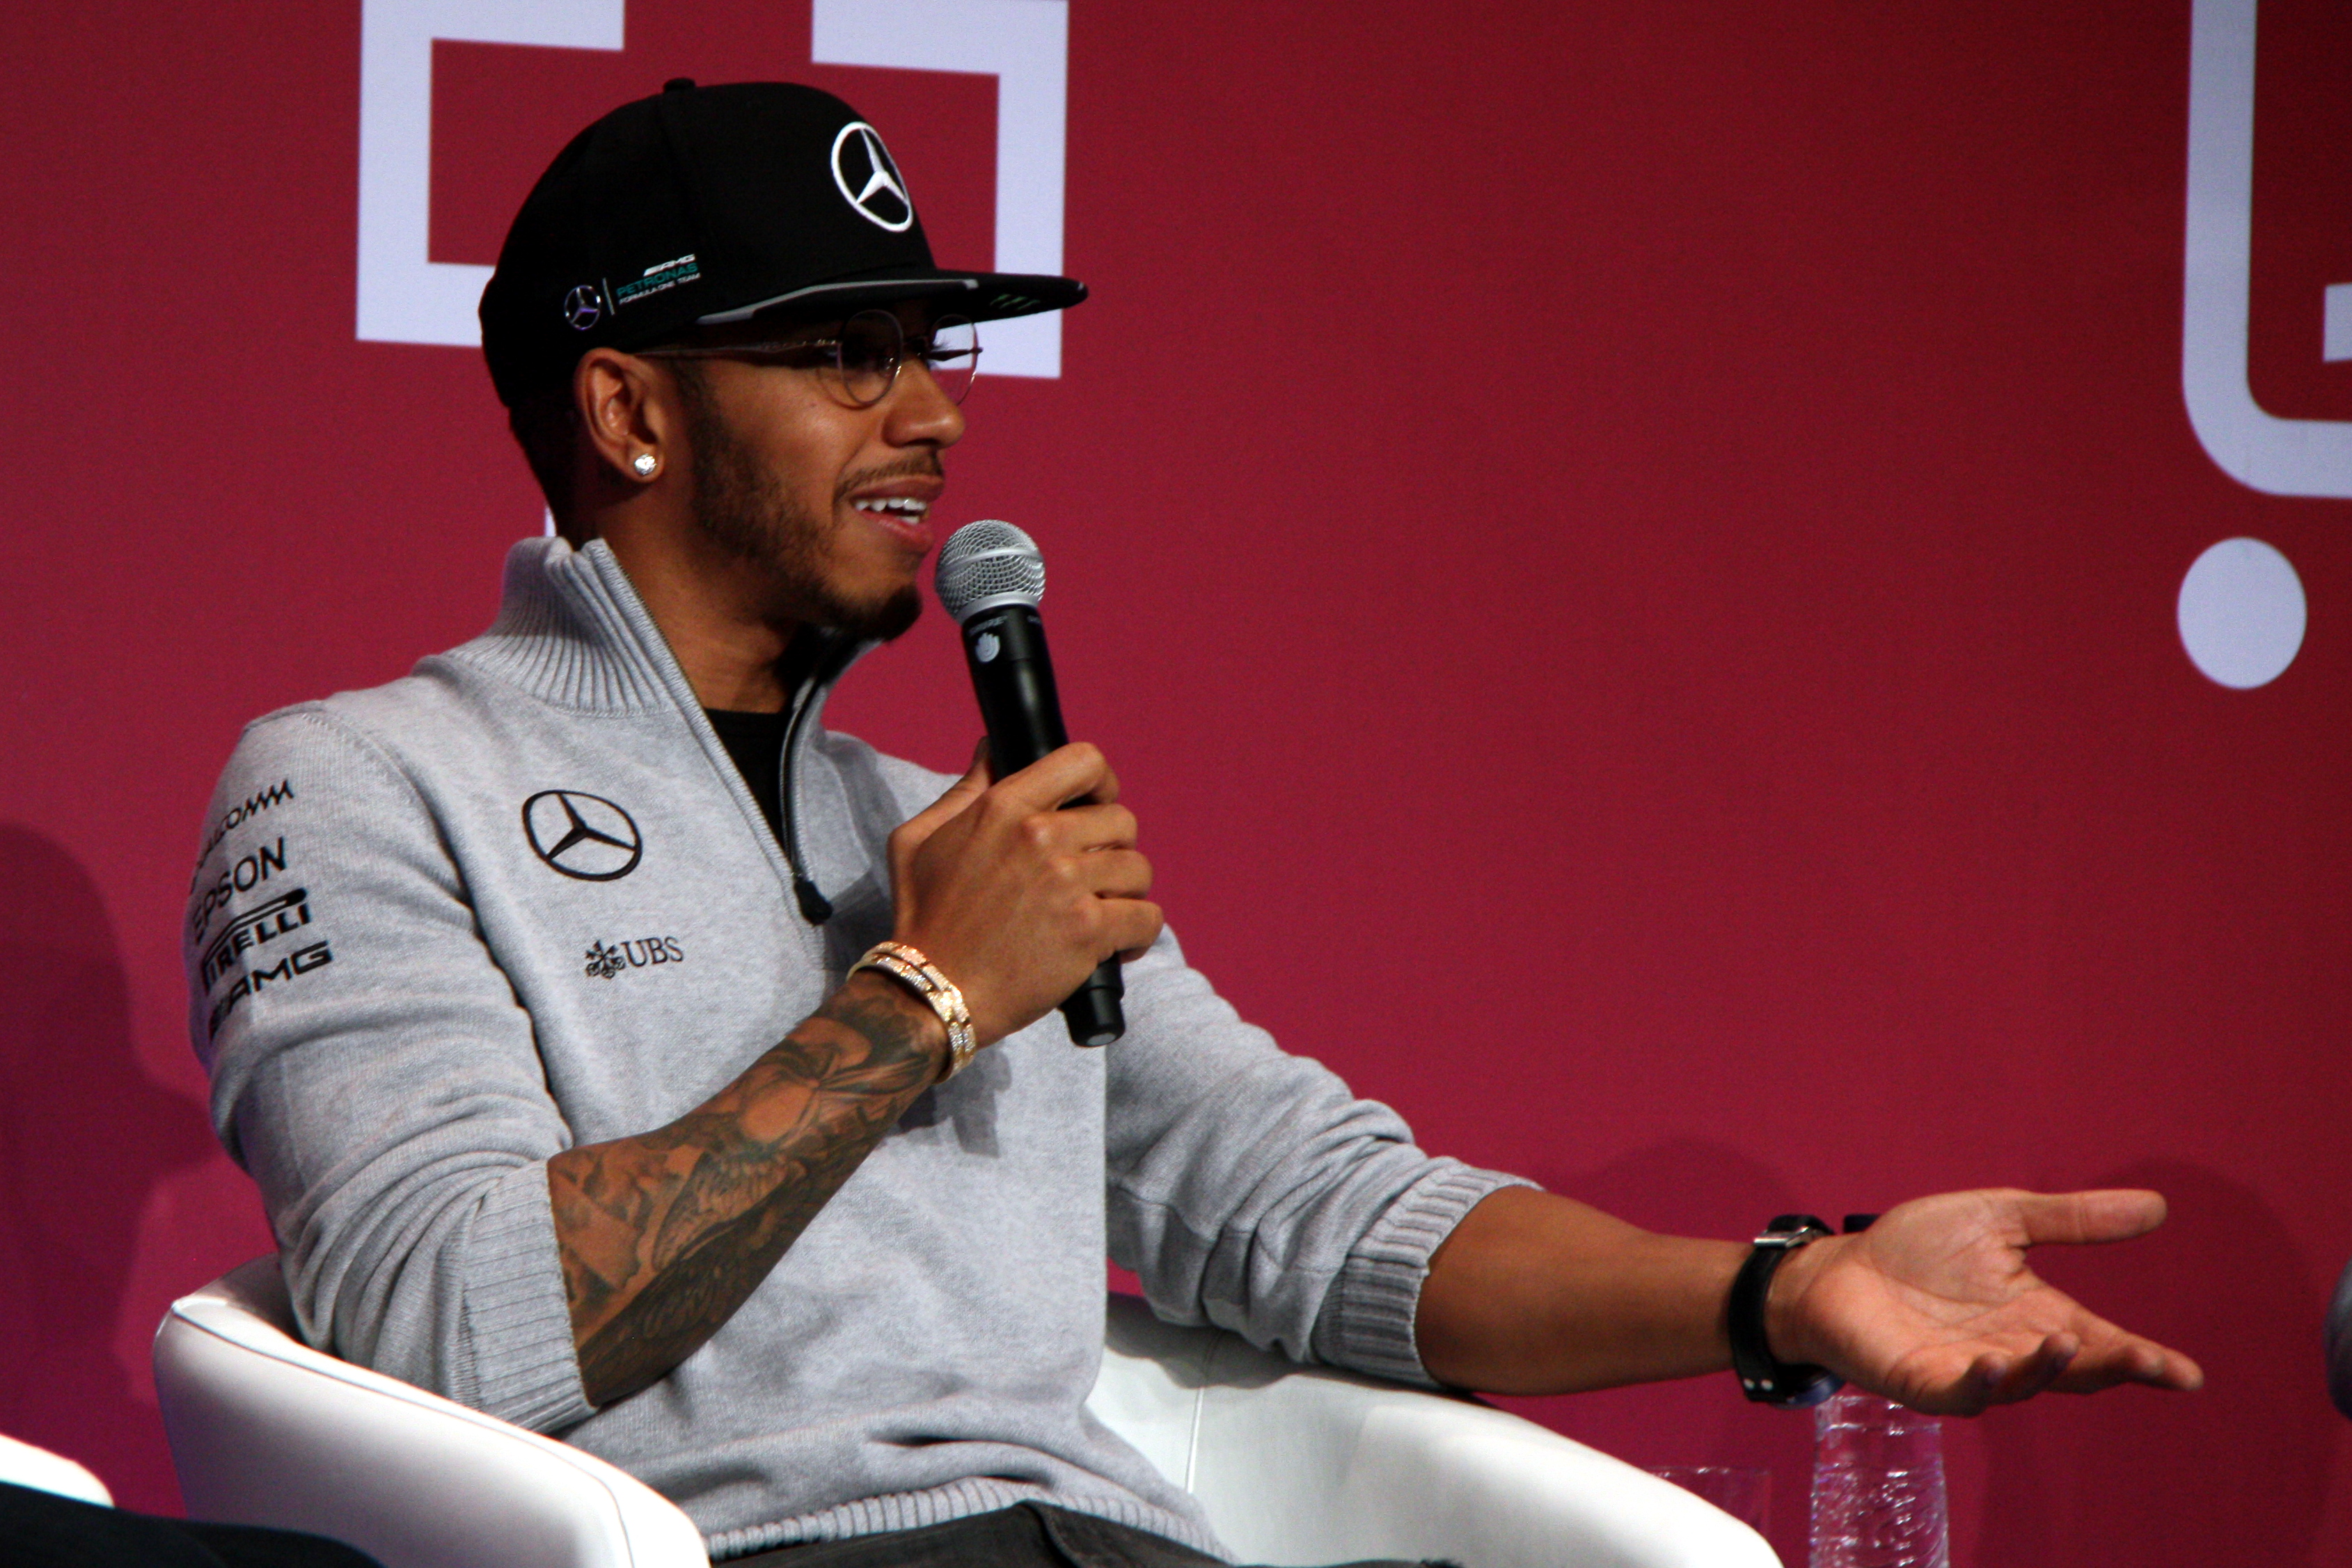 F1 driver Lewis Hamilton during his speech at 2016 Mobile World Congress (by ACN)